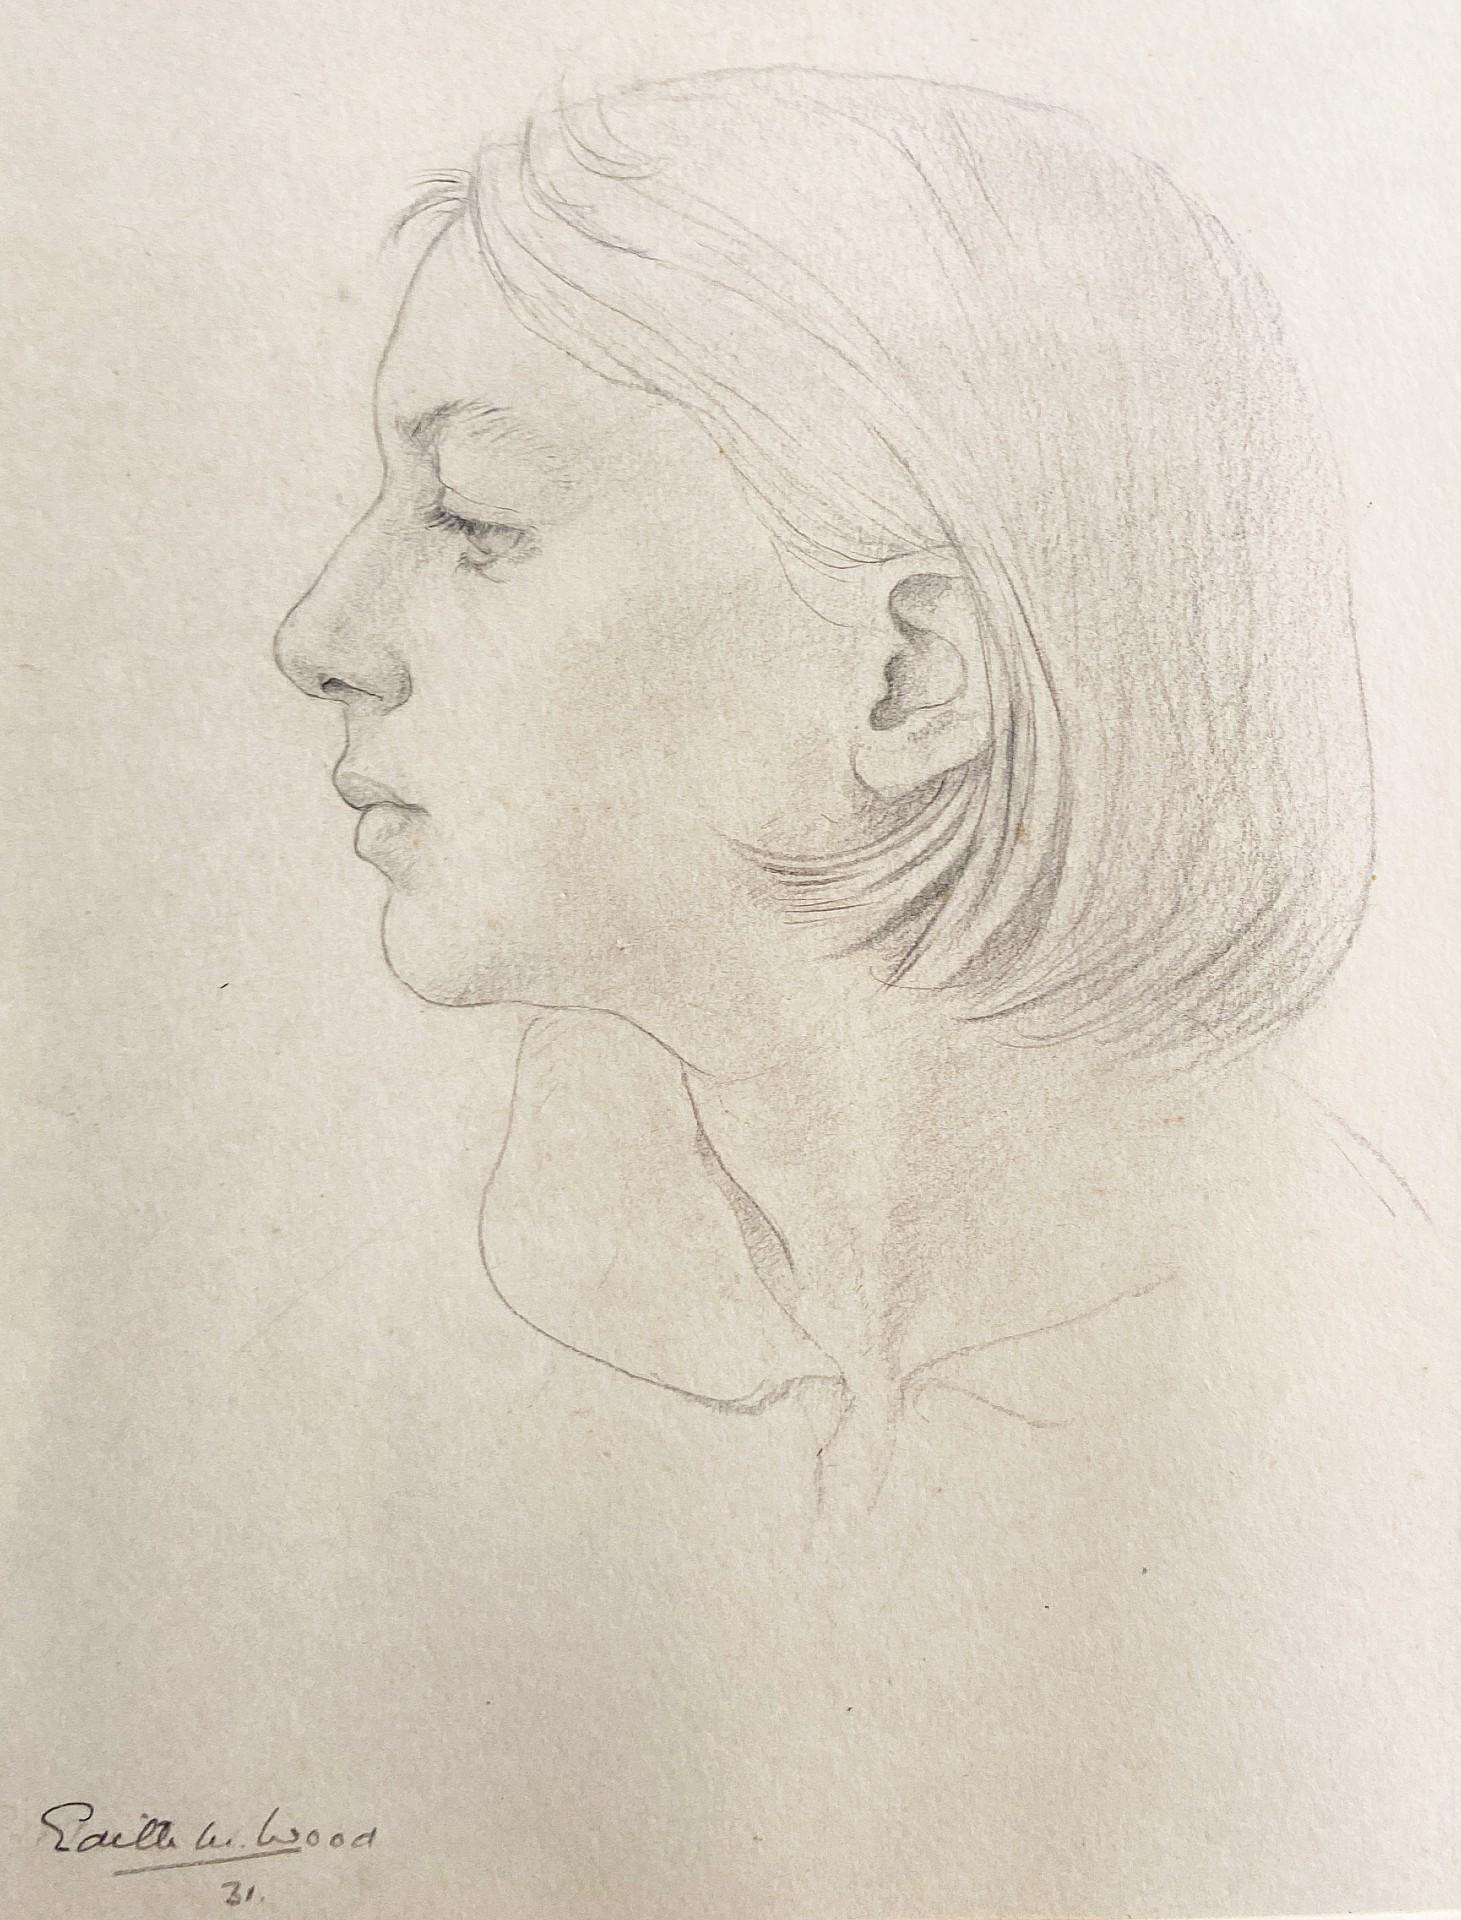 Graphite on paper, signed bottom left
Image size: 7 1/2 x 9 3/4 inches (19 x 25cm)
Contemporary frame

A characterful portrait of a woman in profile. The artist has captured much of the personality of the sitter, with her elegant head tilt and fine